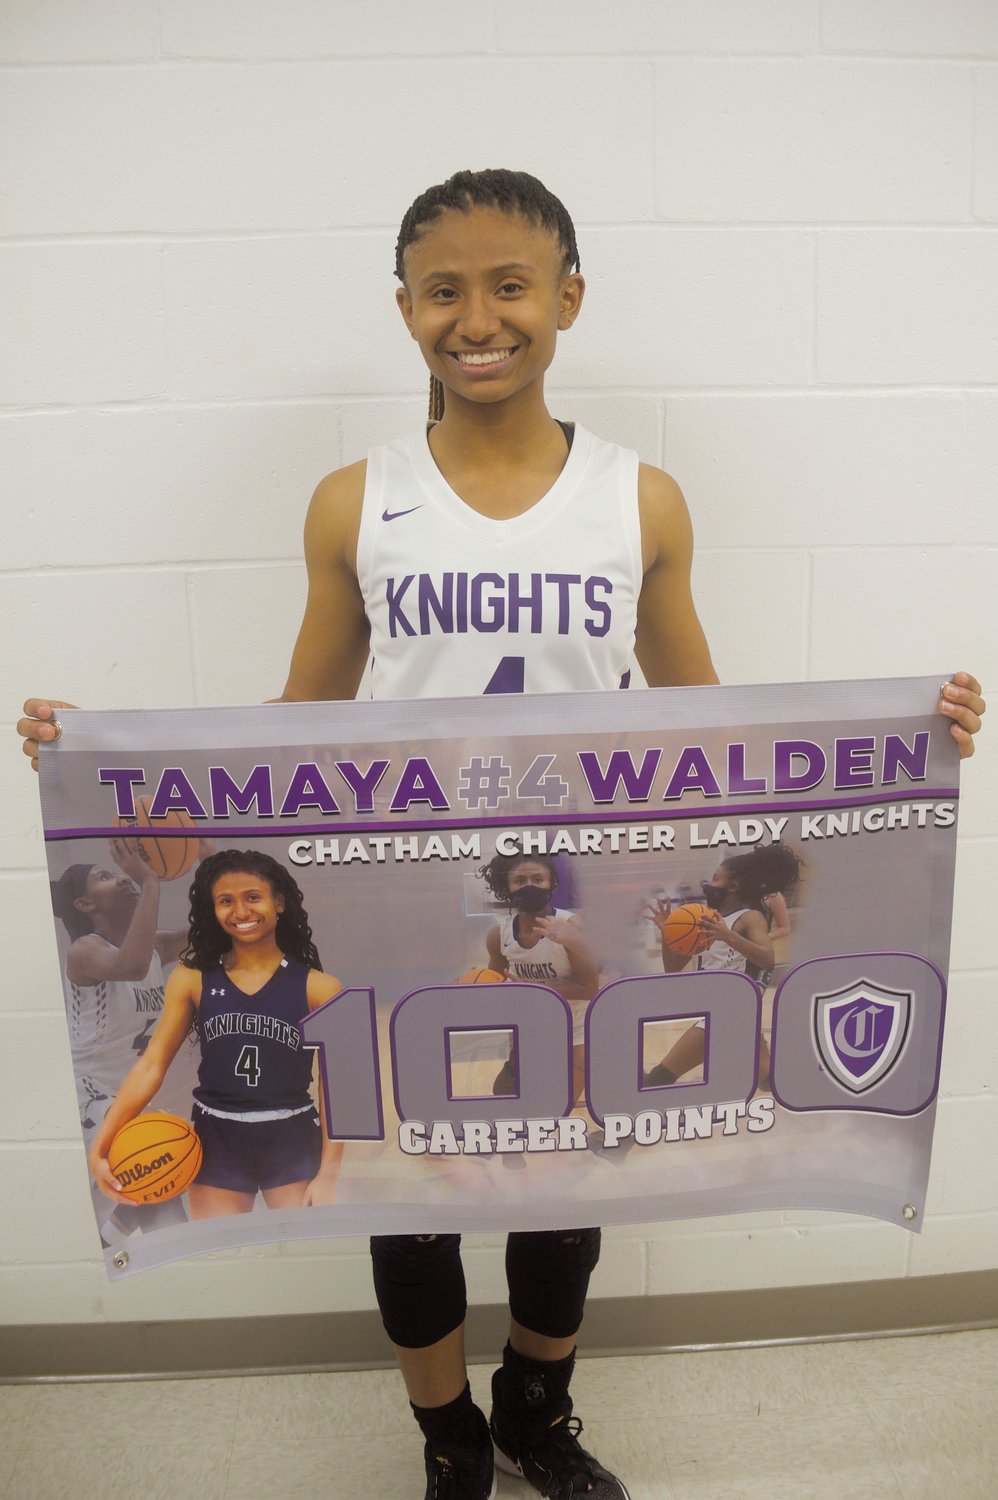 Chatham Charter junior Tamaya Walden poses with a banner made in honor of her hitting her career milestone of 1,000 points after the Knights' win over Woods Charter on Feb. 8. She became just the third women's basketball player in school history to hit that mark.